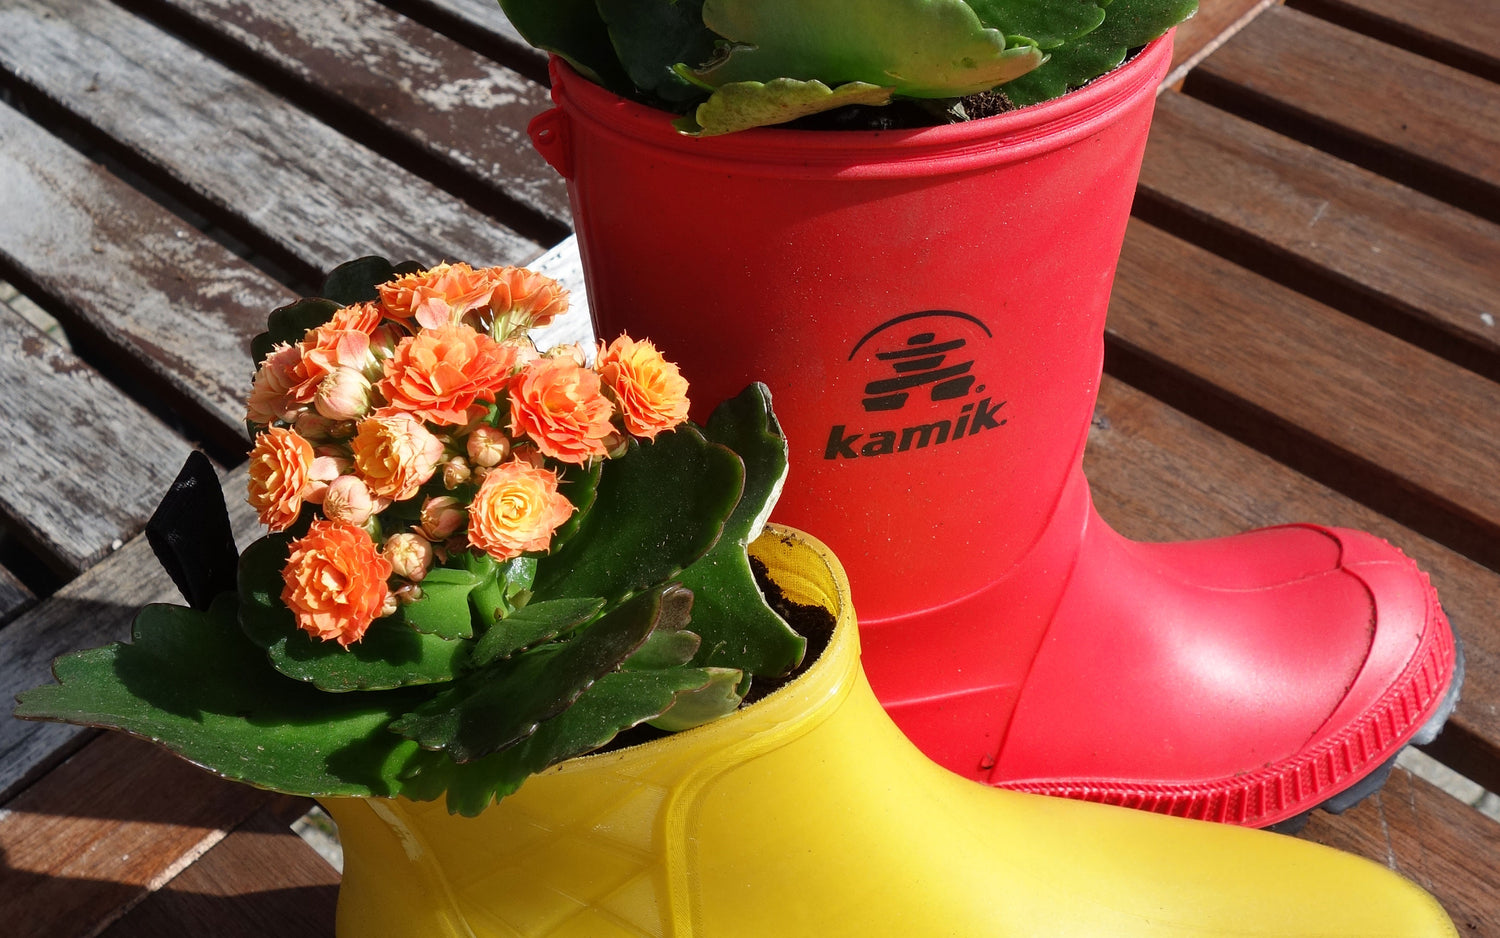 HOW TO: PLANT FLOWERS IN A BOOT